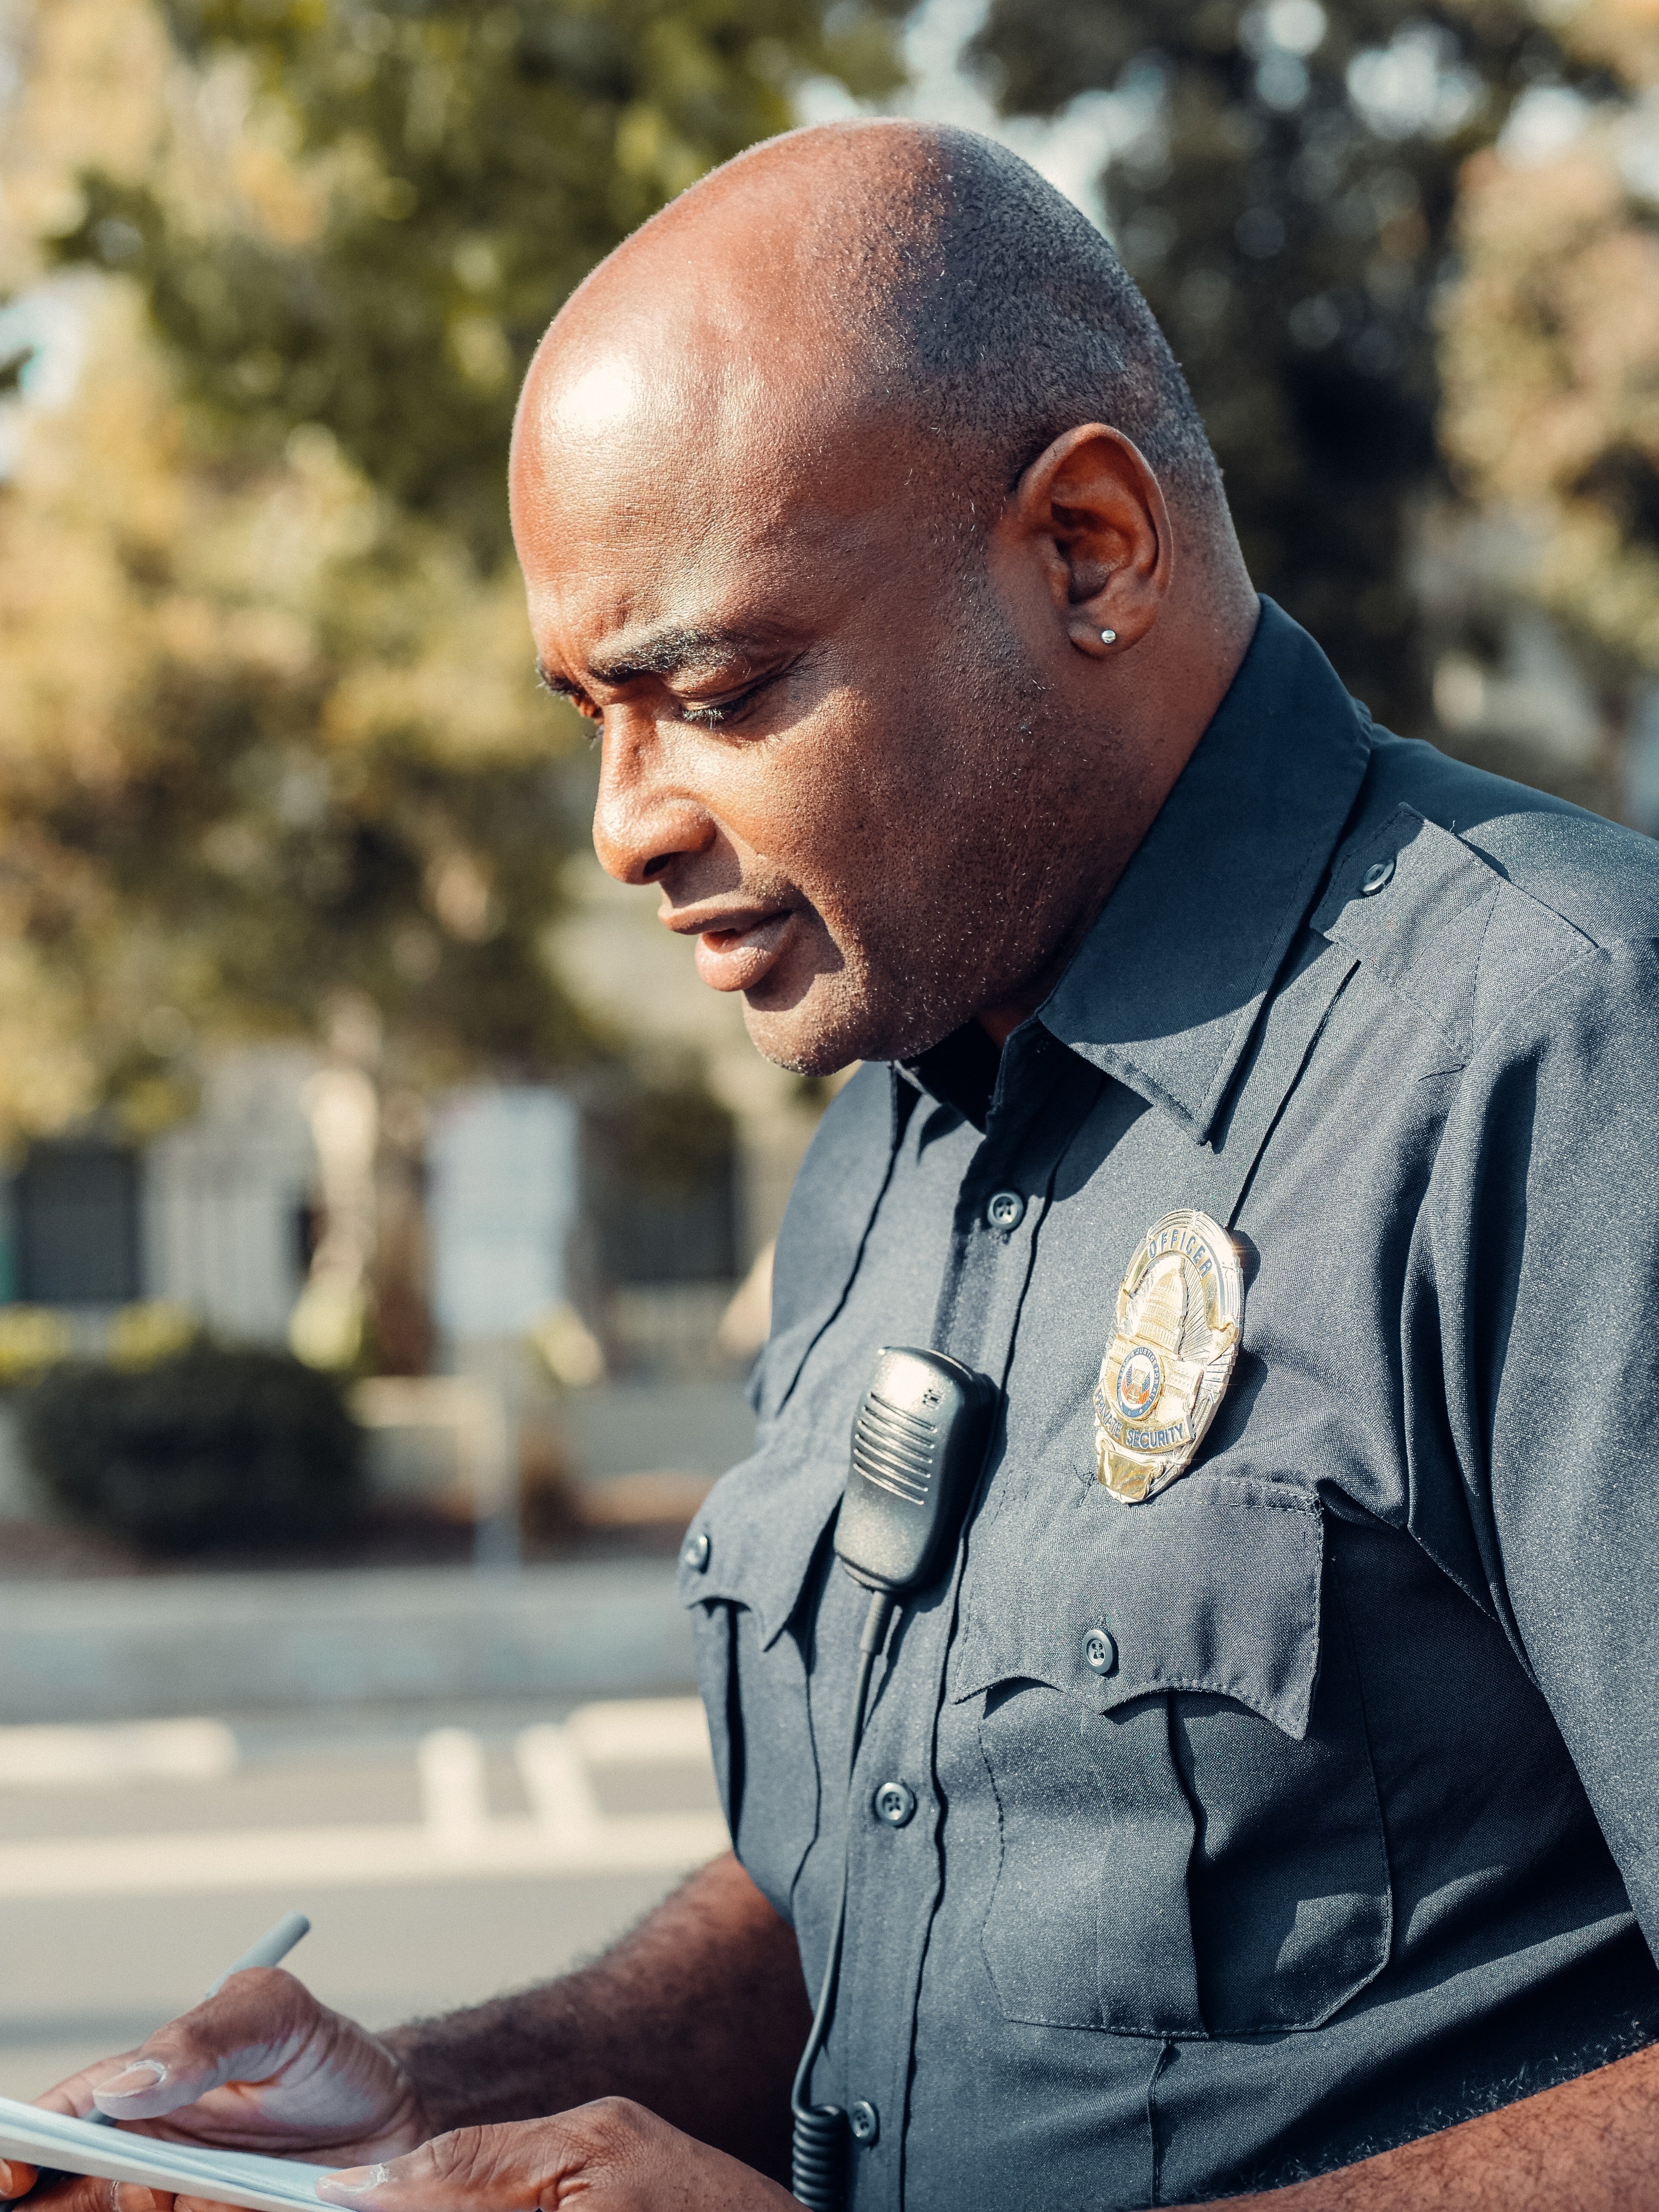 Linda called officer Anderson for help. | Source: Pexels